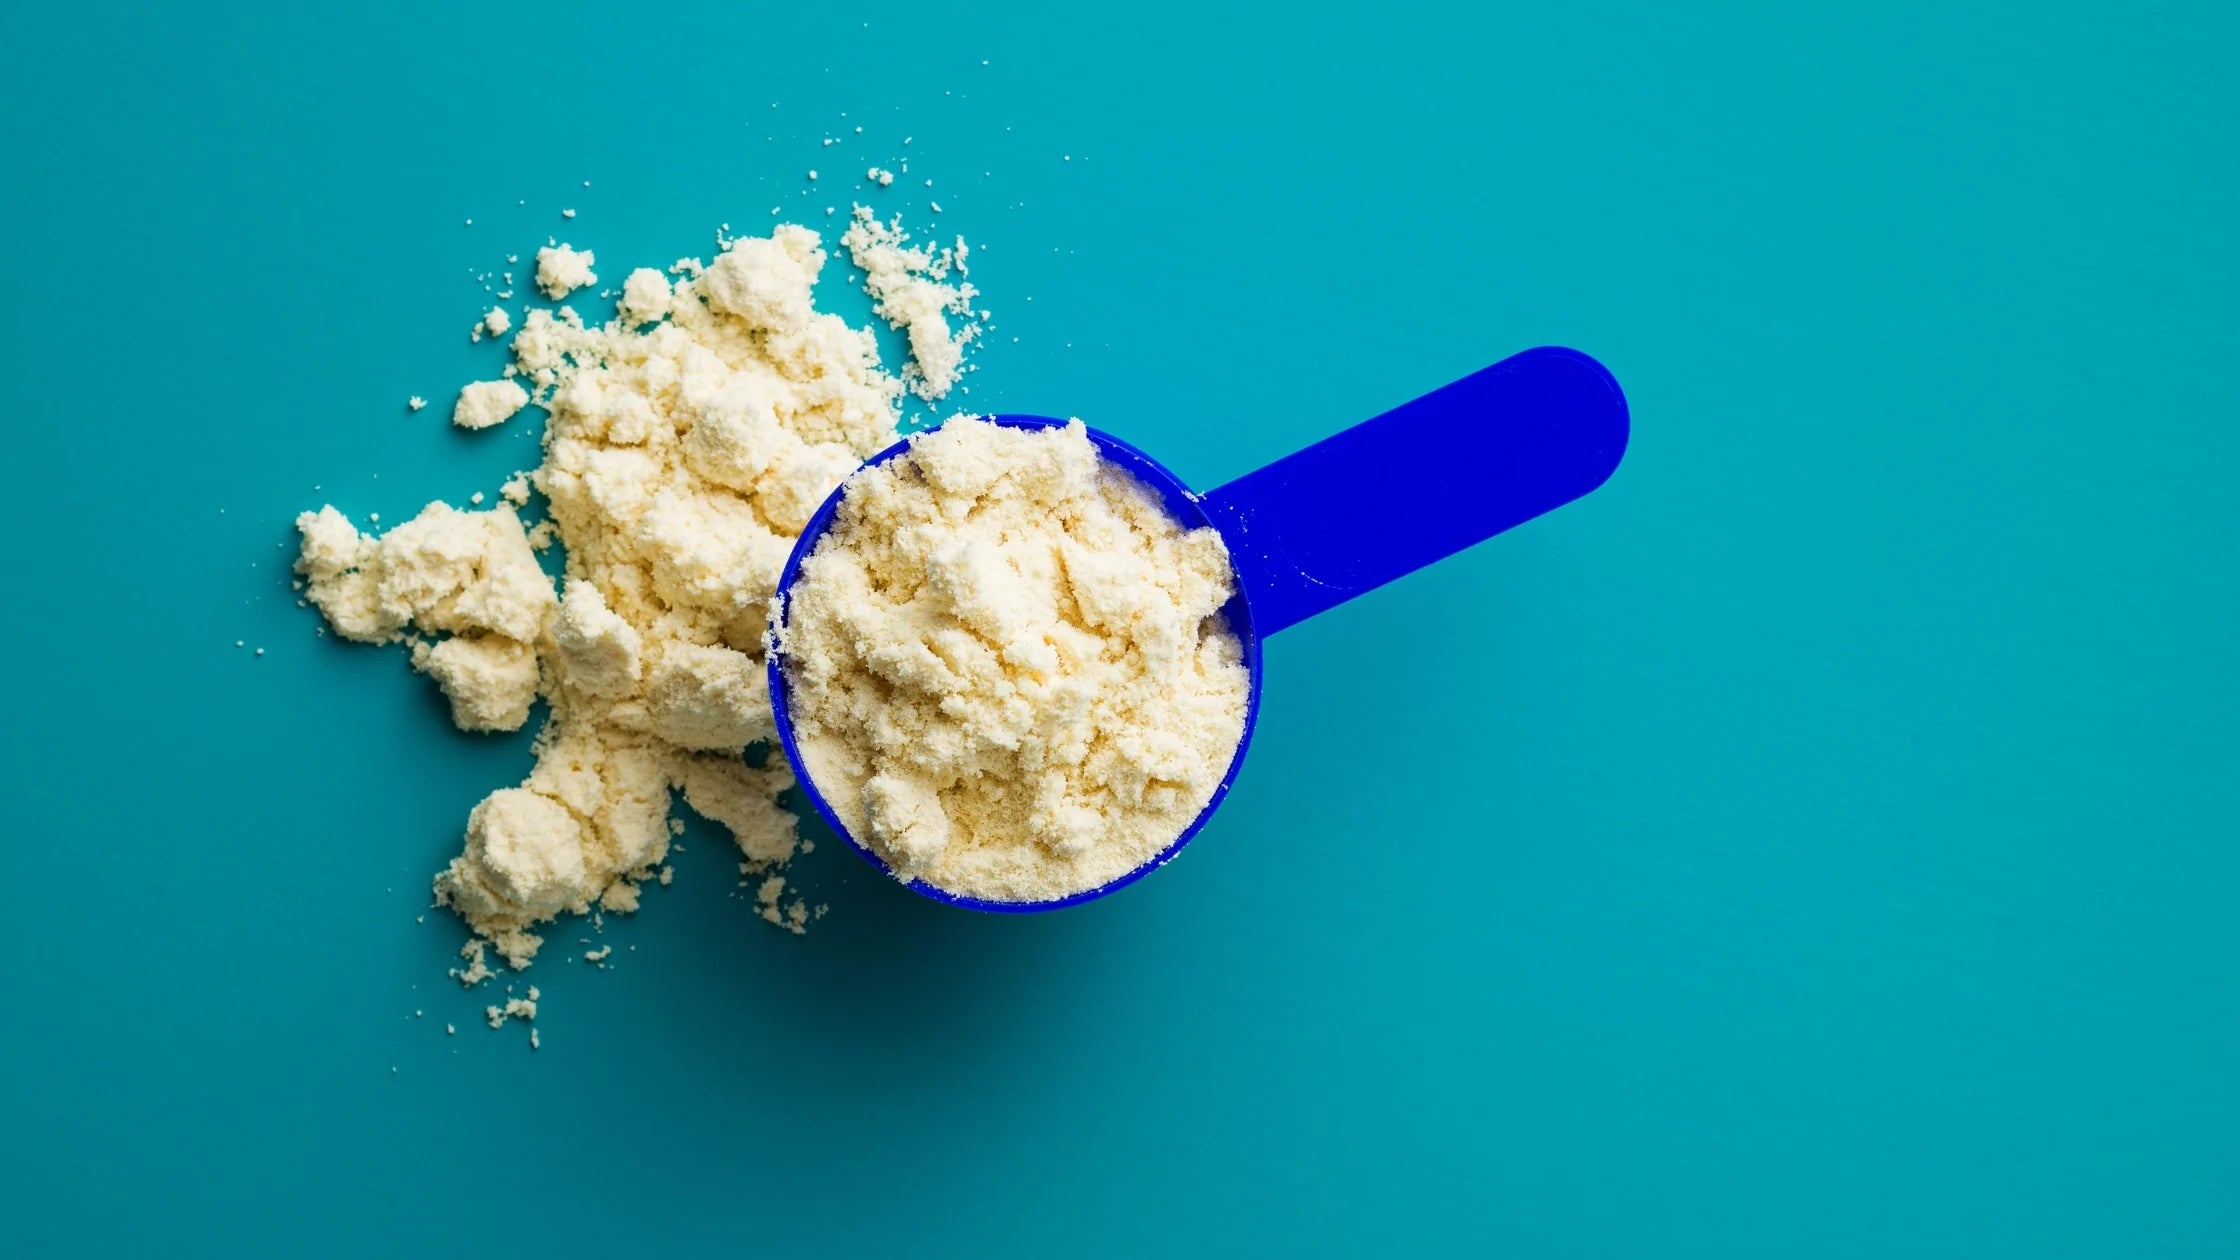 The Truth About Whey Protein & 5 Plant-Based Alternatives